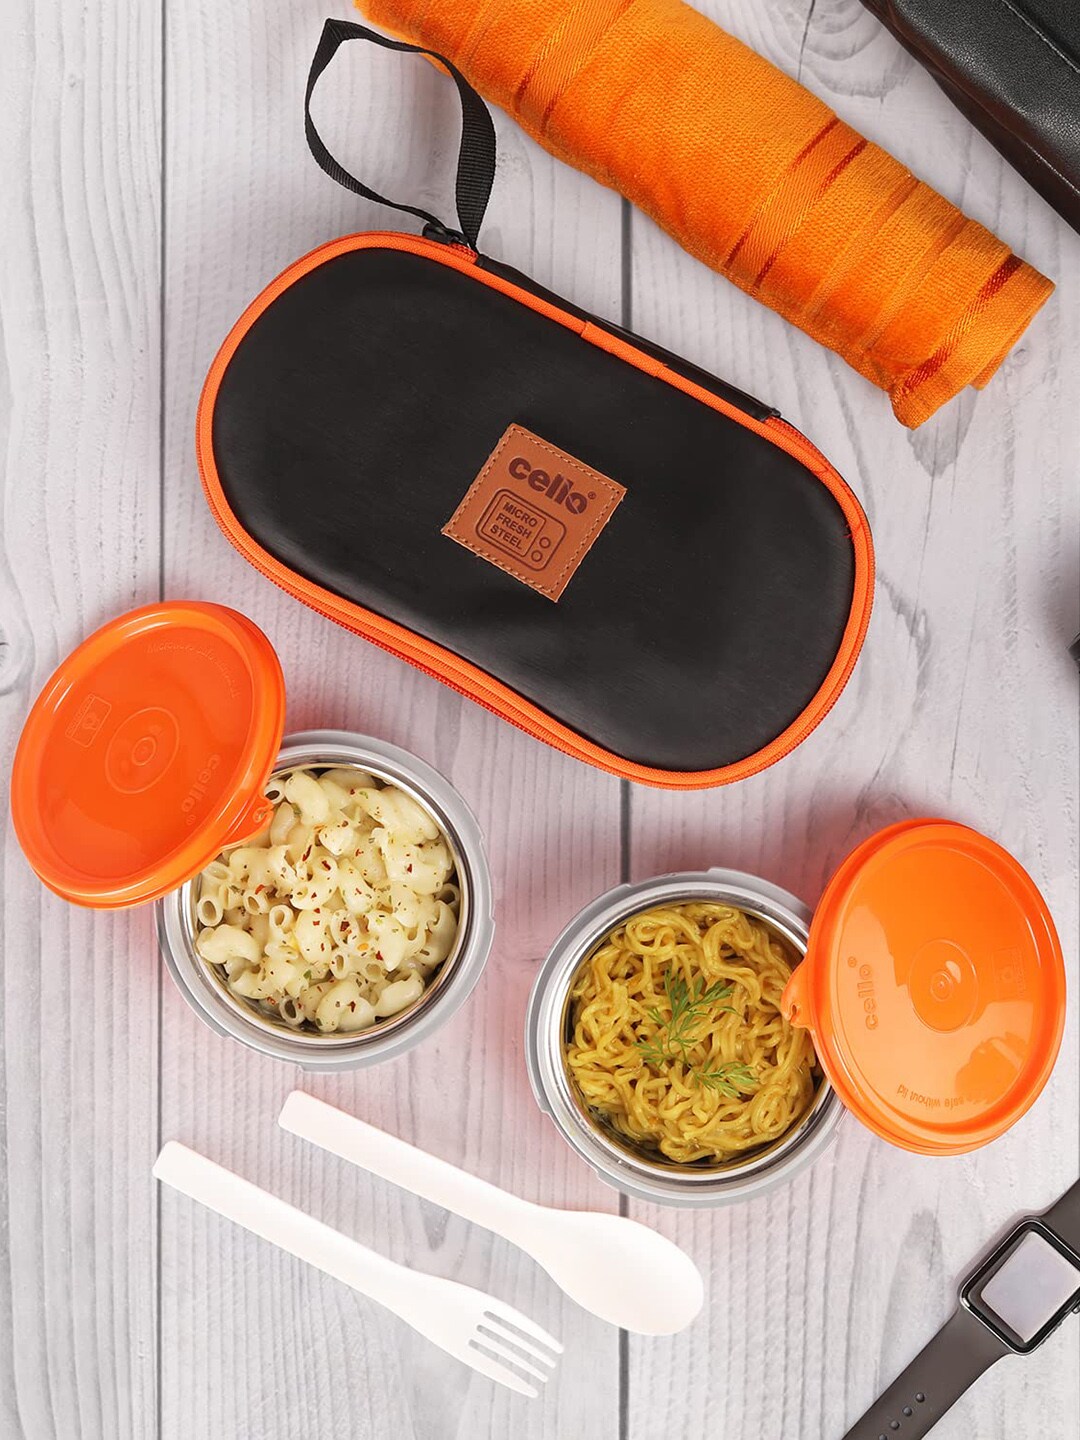 Cello Orange Stainless-Steel Lunch Box Price in India